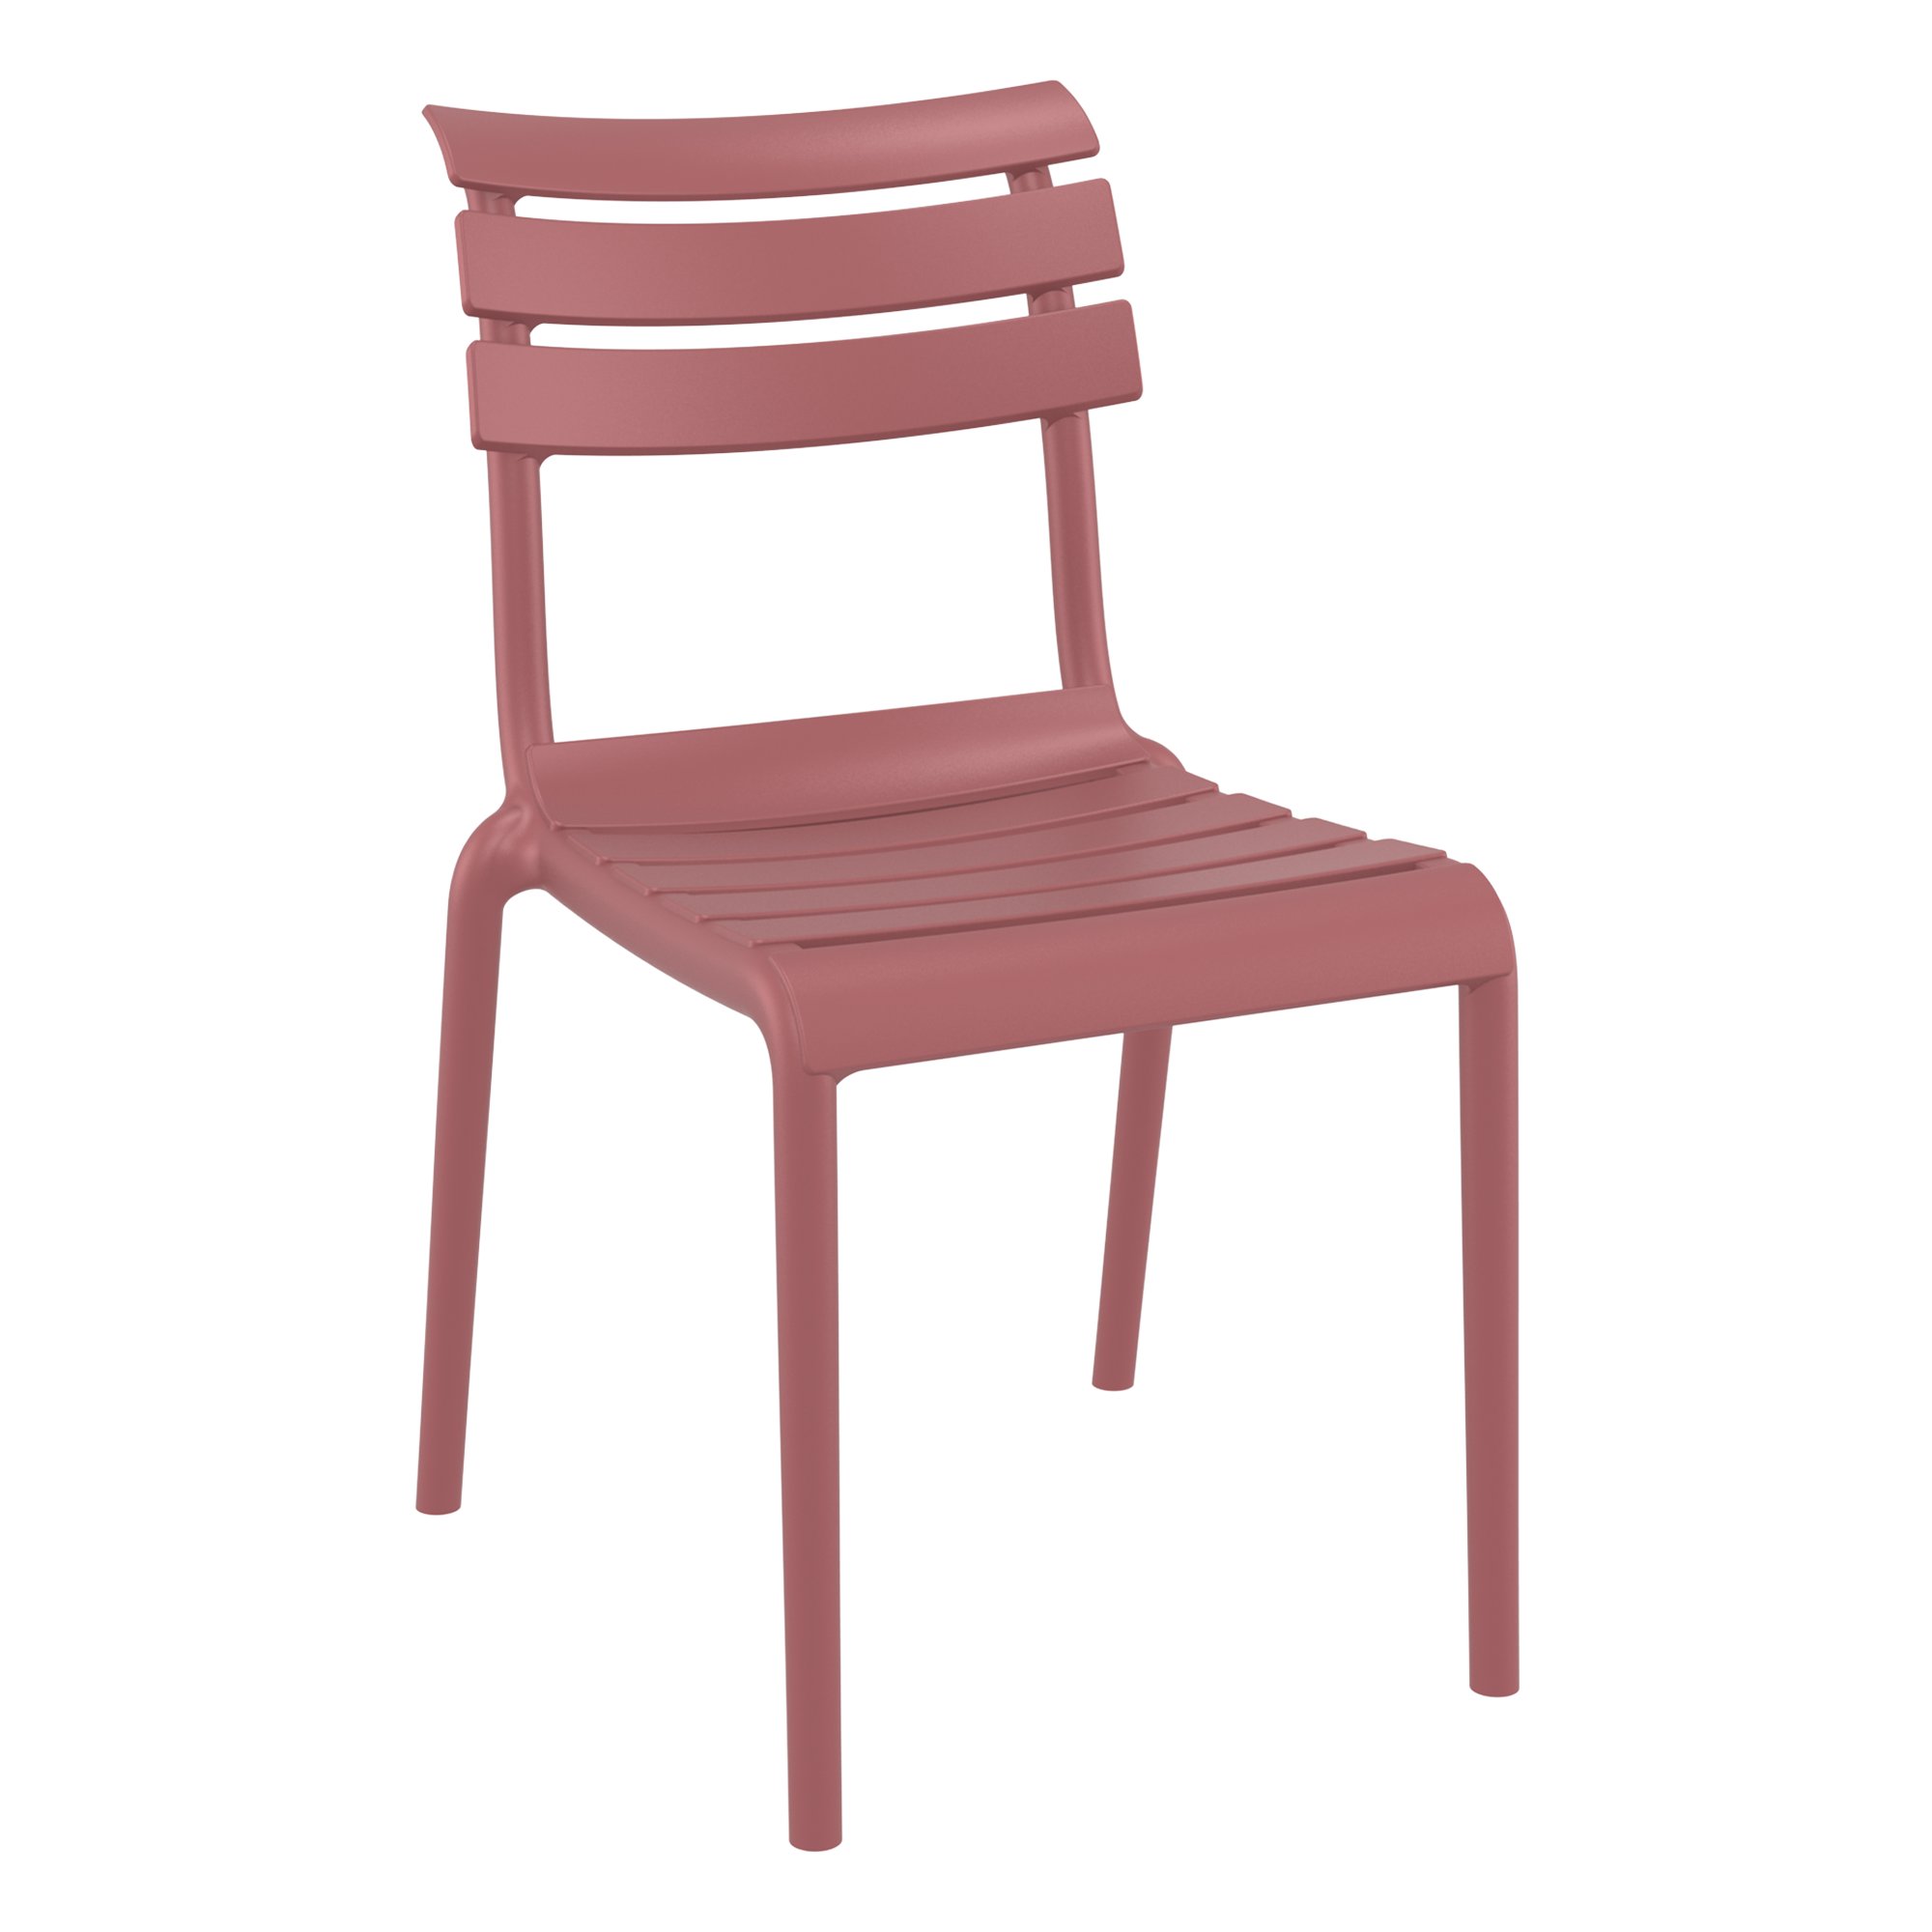 Marsala Marketa Stackable Chair for Indoor and Outdoor Use